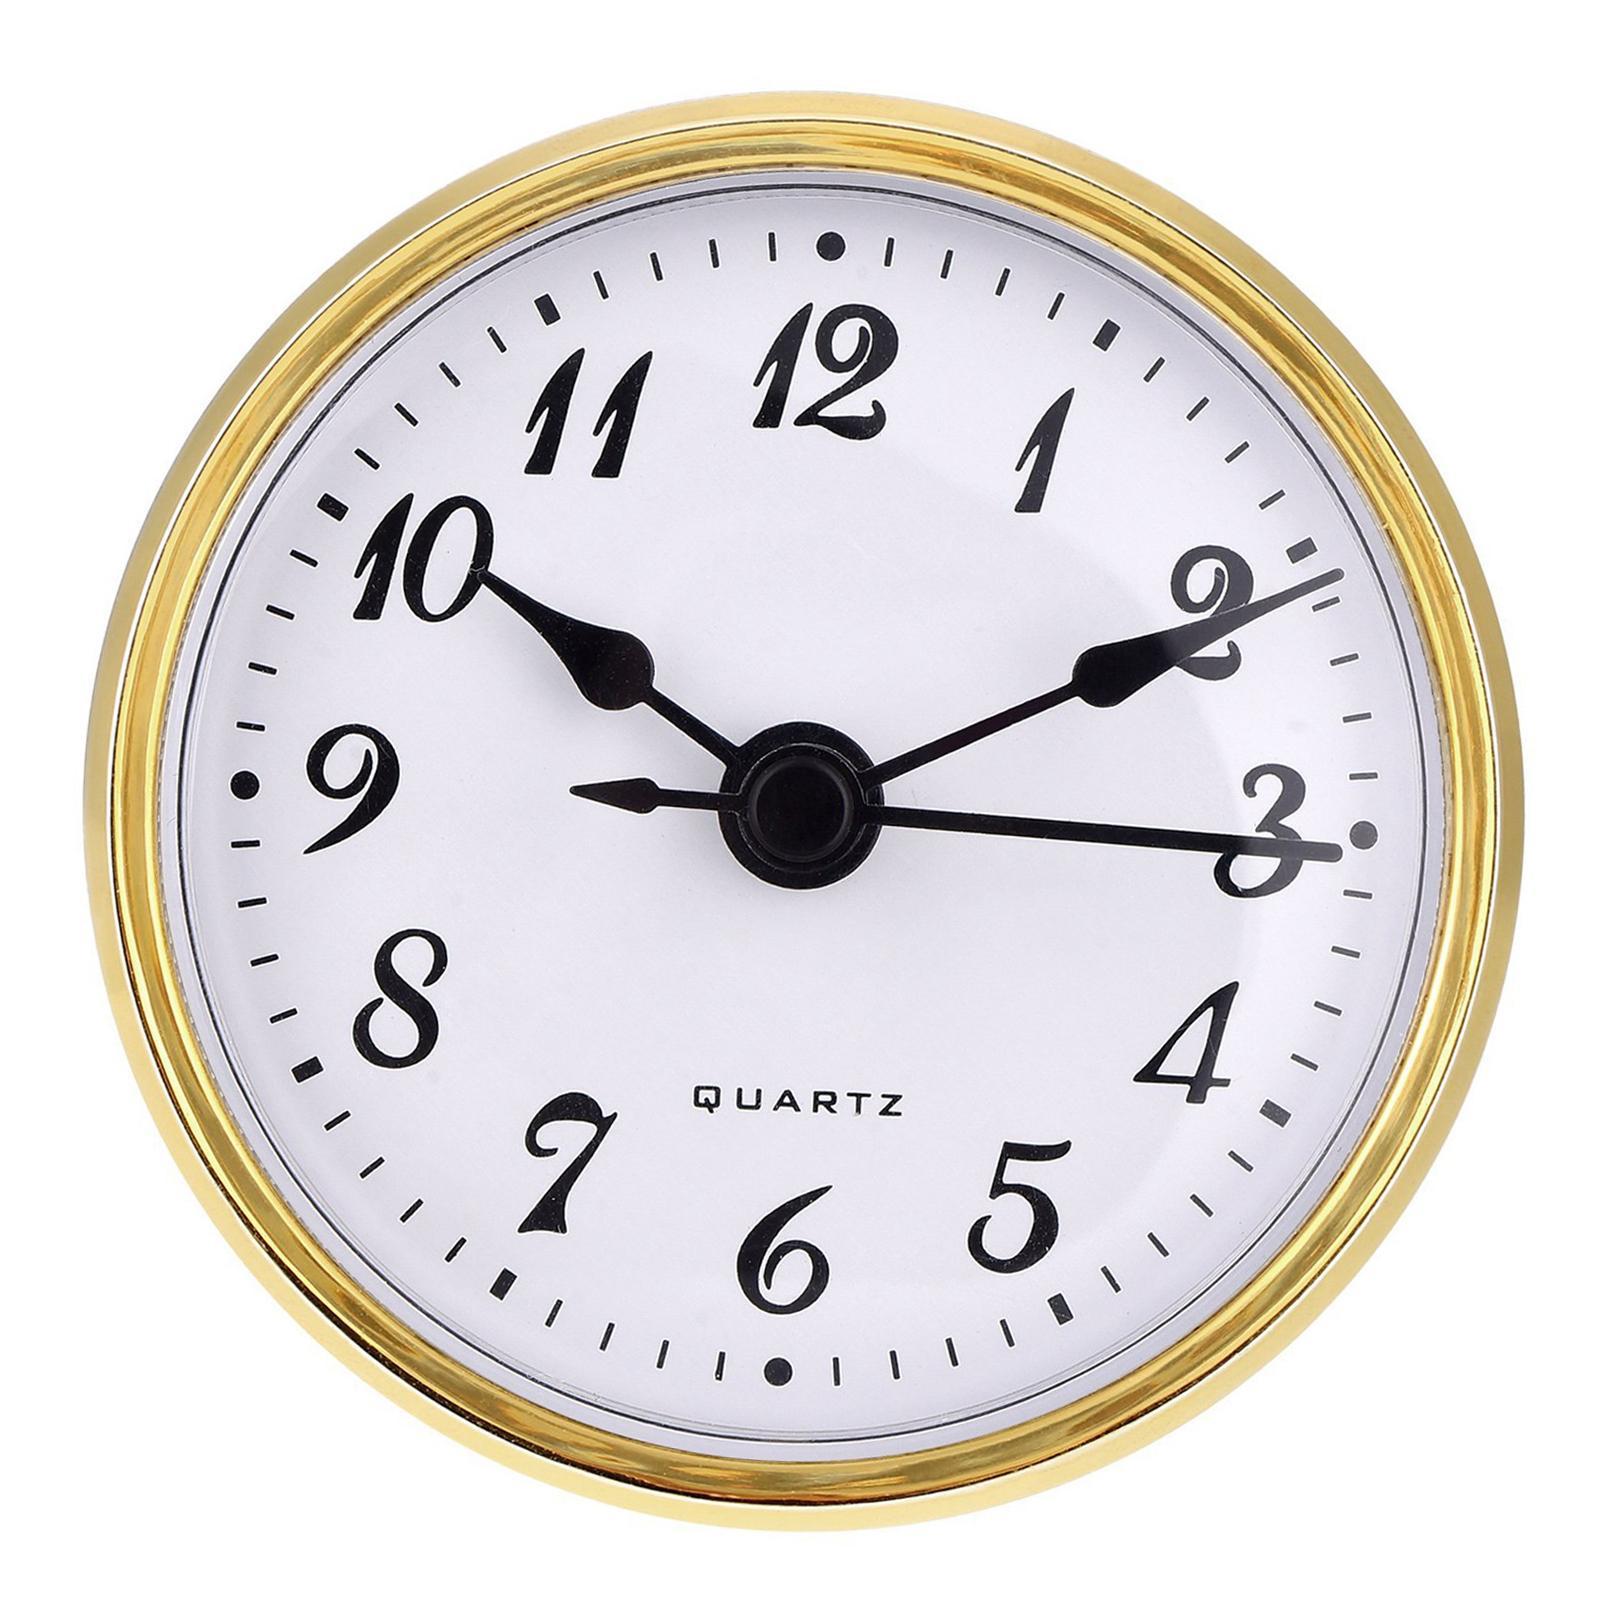 70mm Clock Insert Gold Rim White Dial Round  Movement Battery Operated